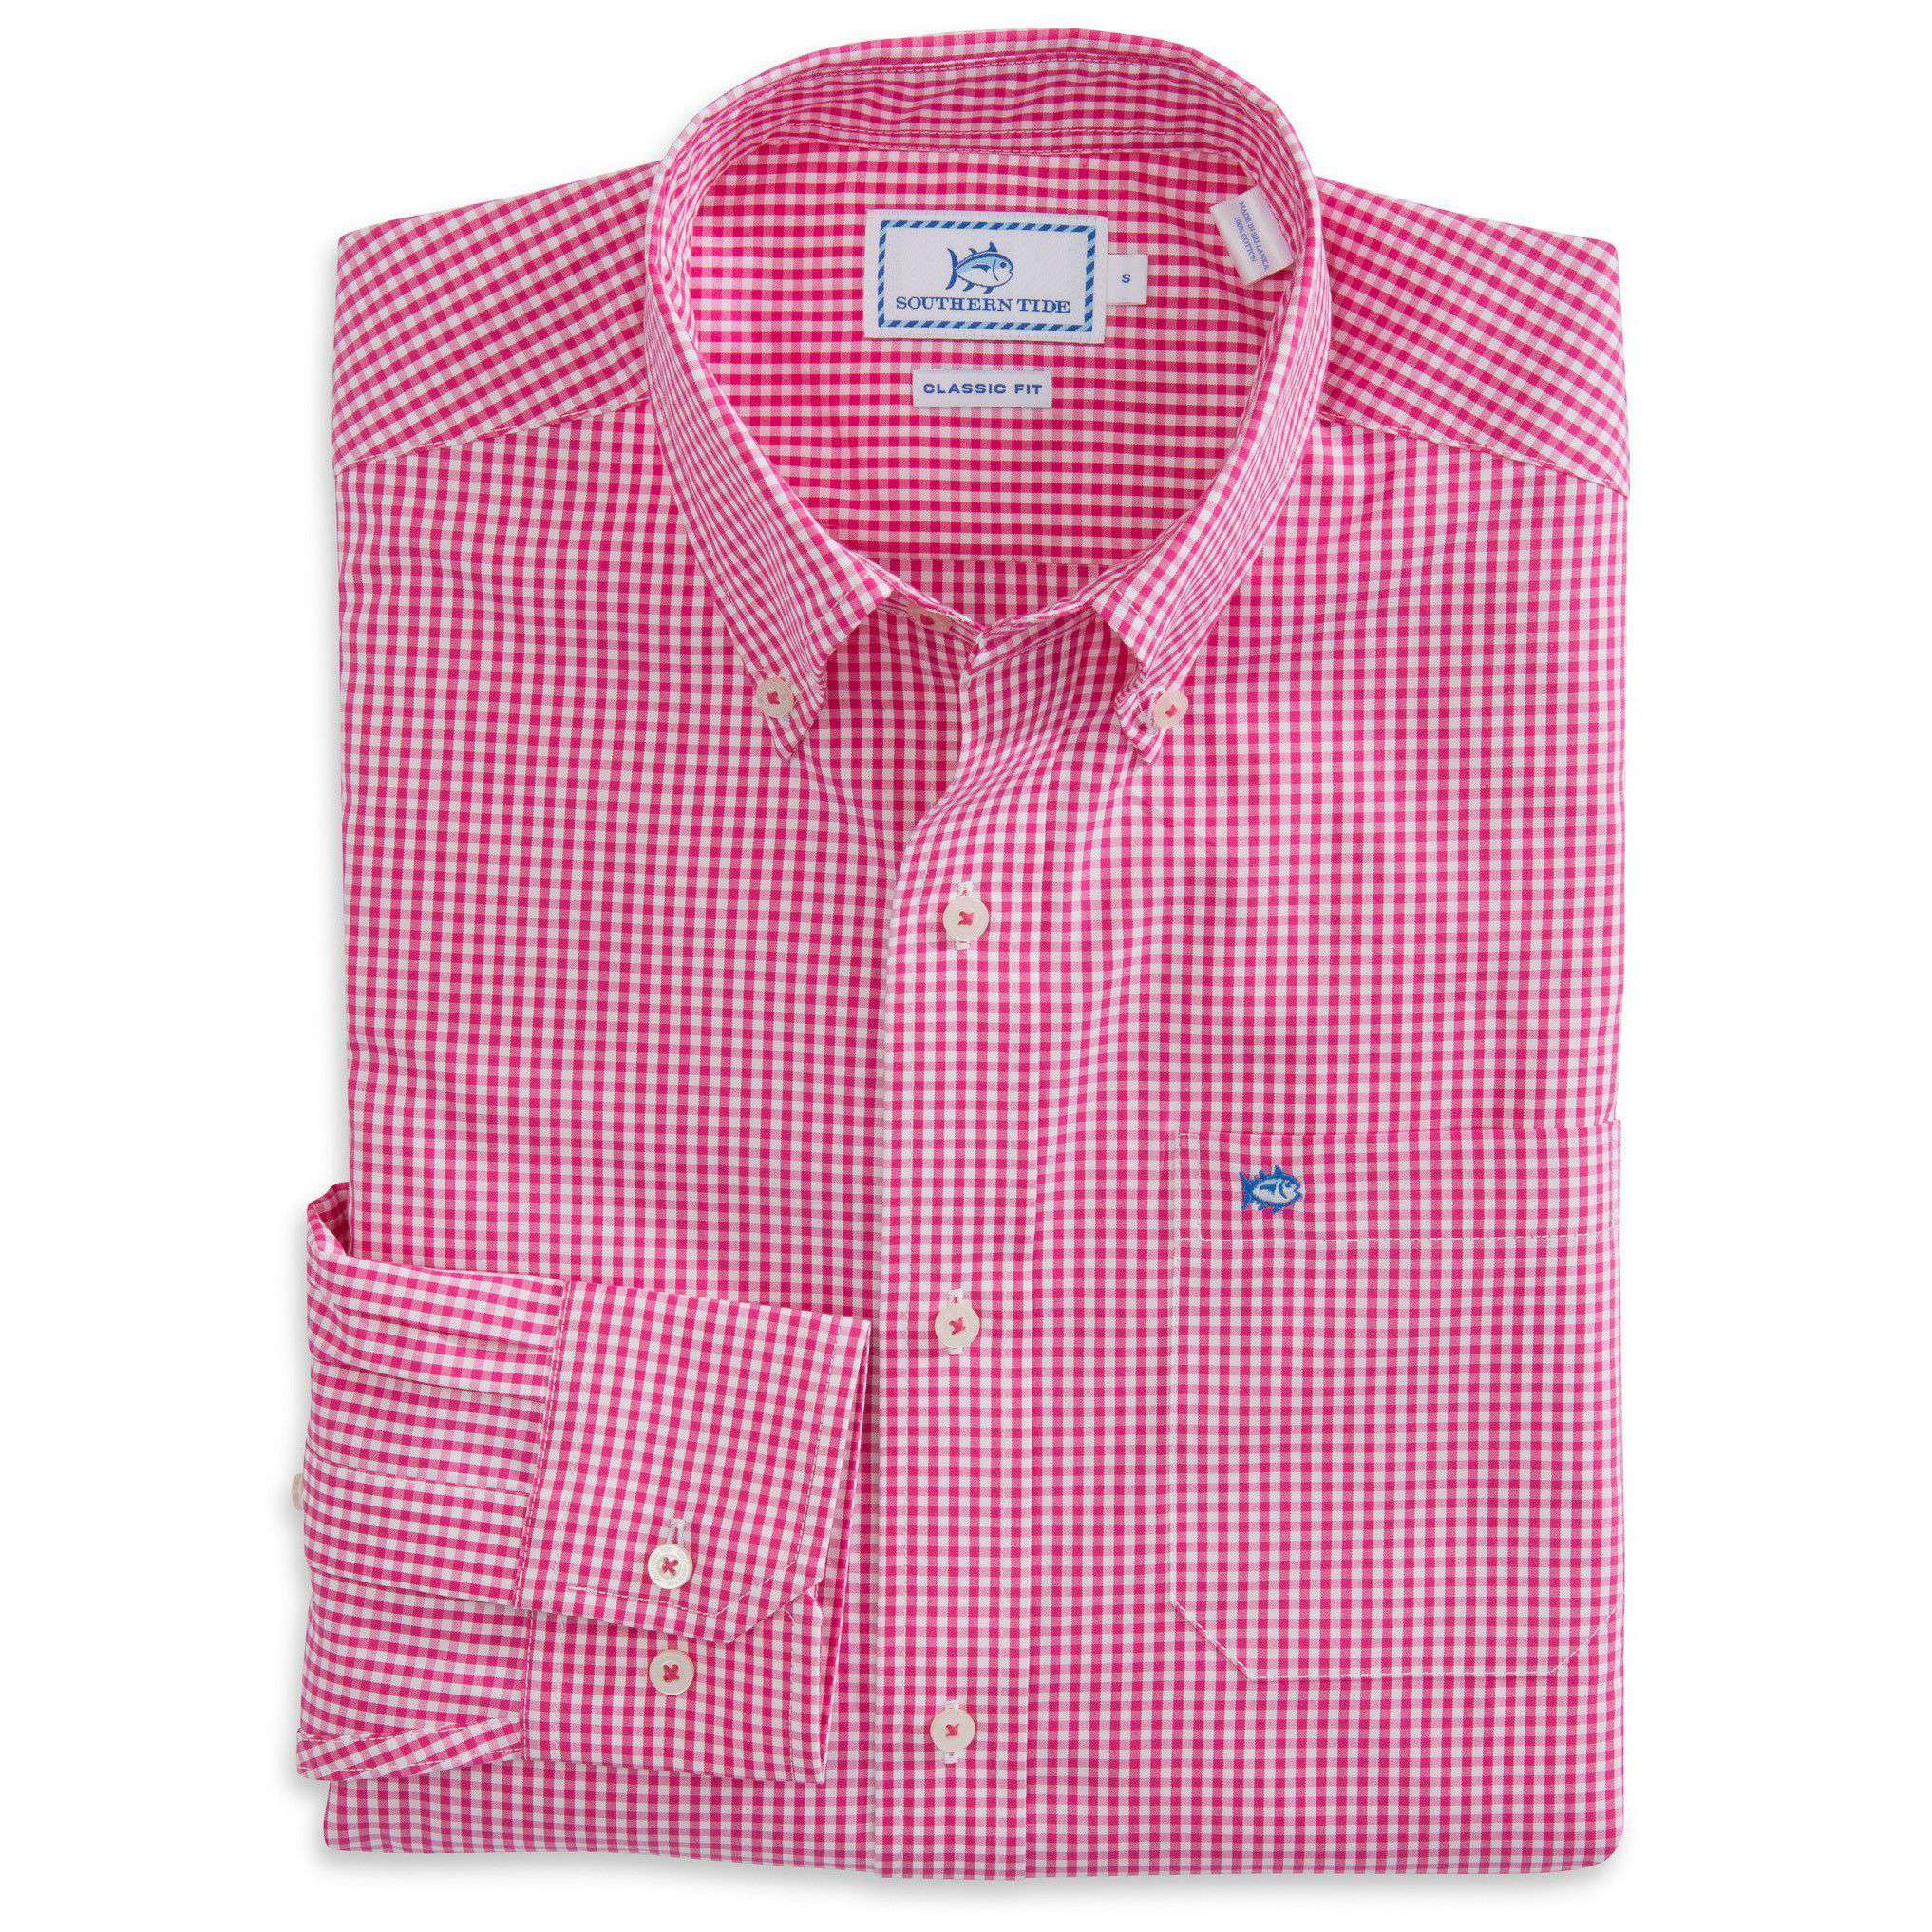 Highgate Check Classic Fit Sport Shirt in Hot Pink by Southern Tide - Country Club Prep